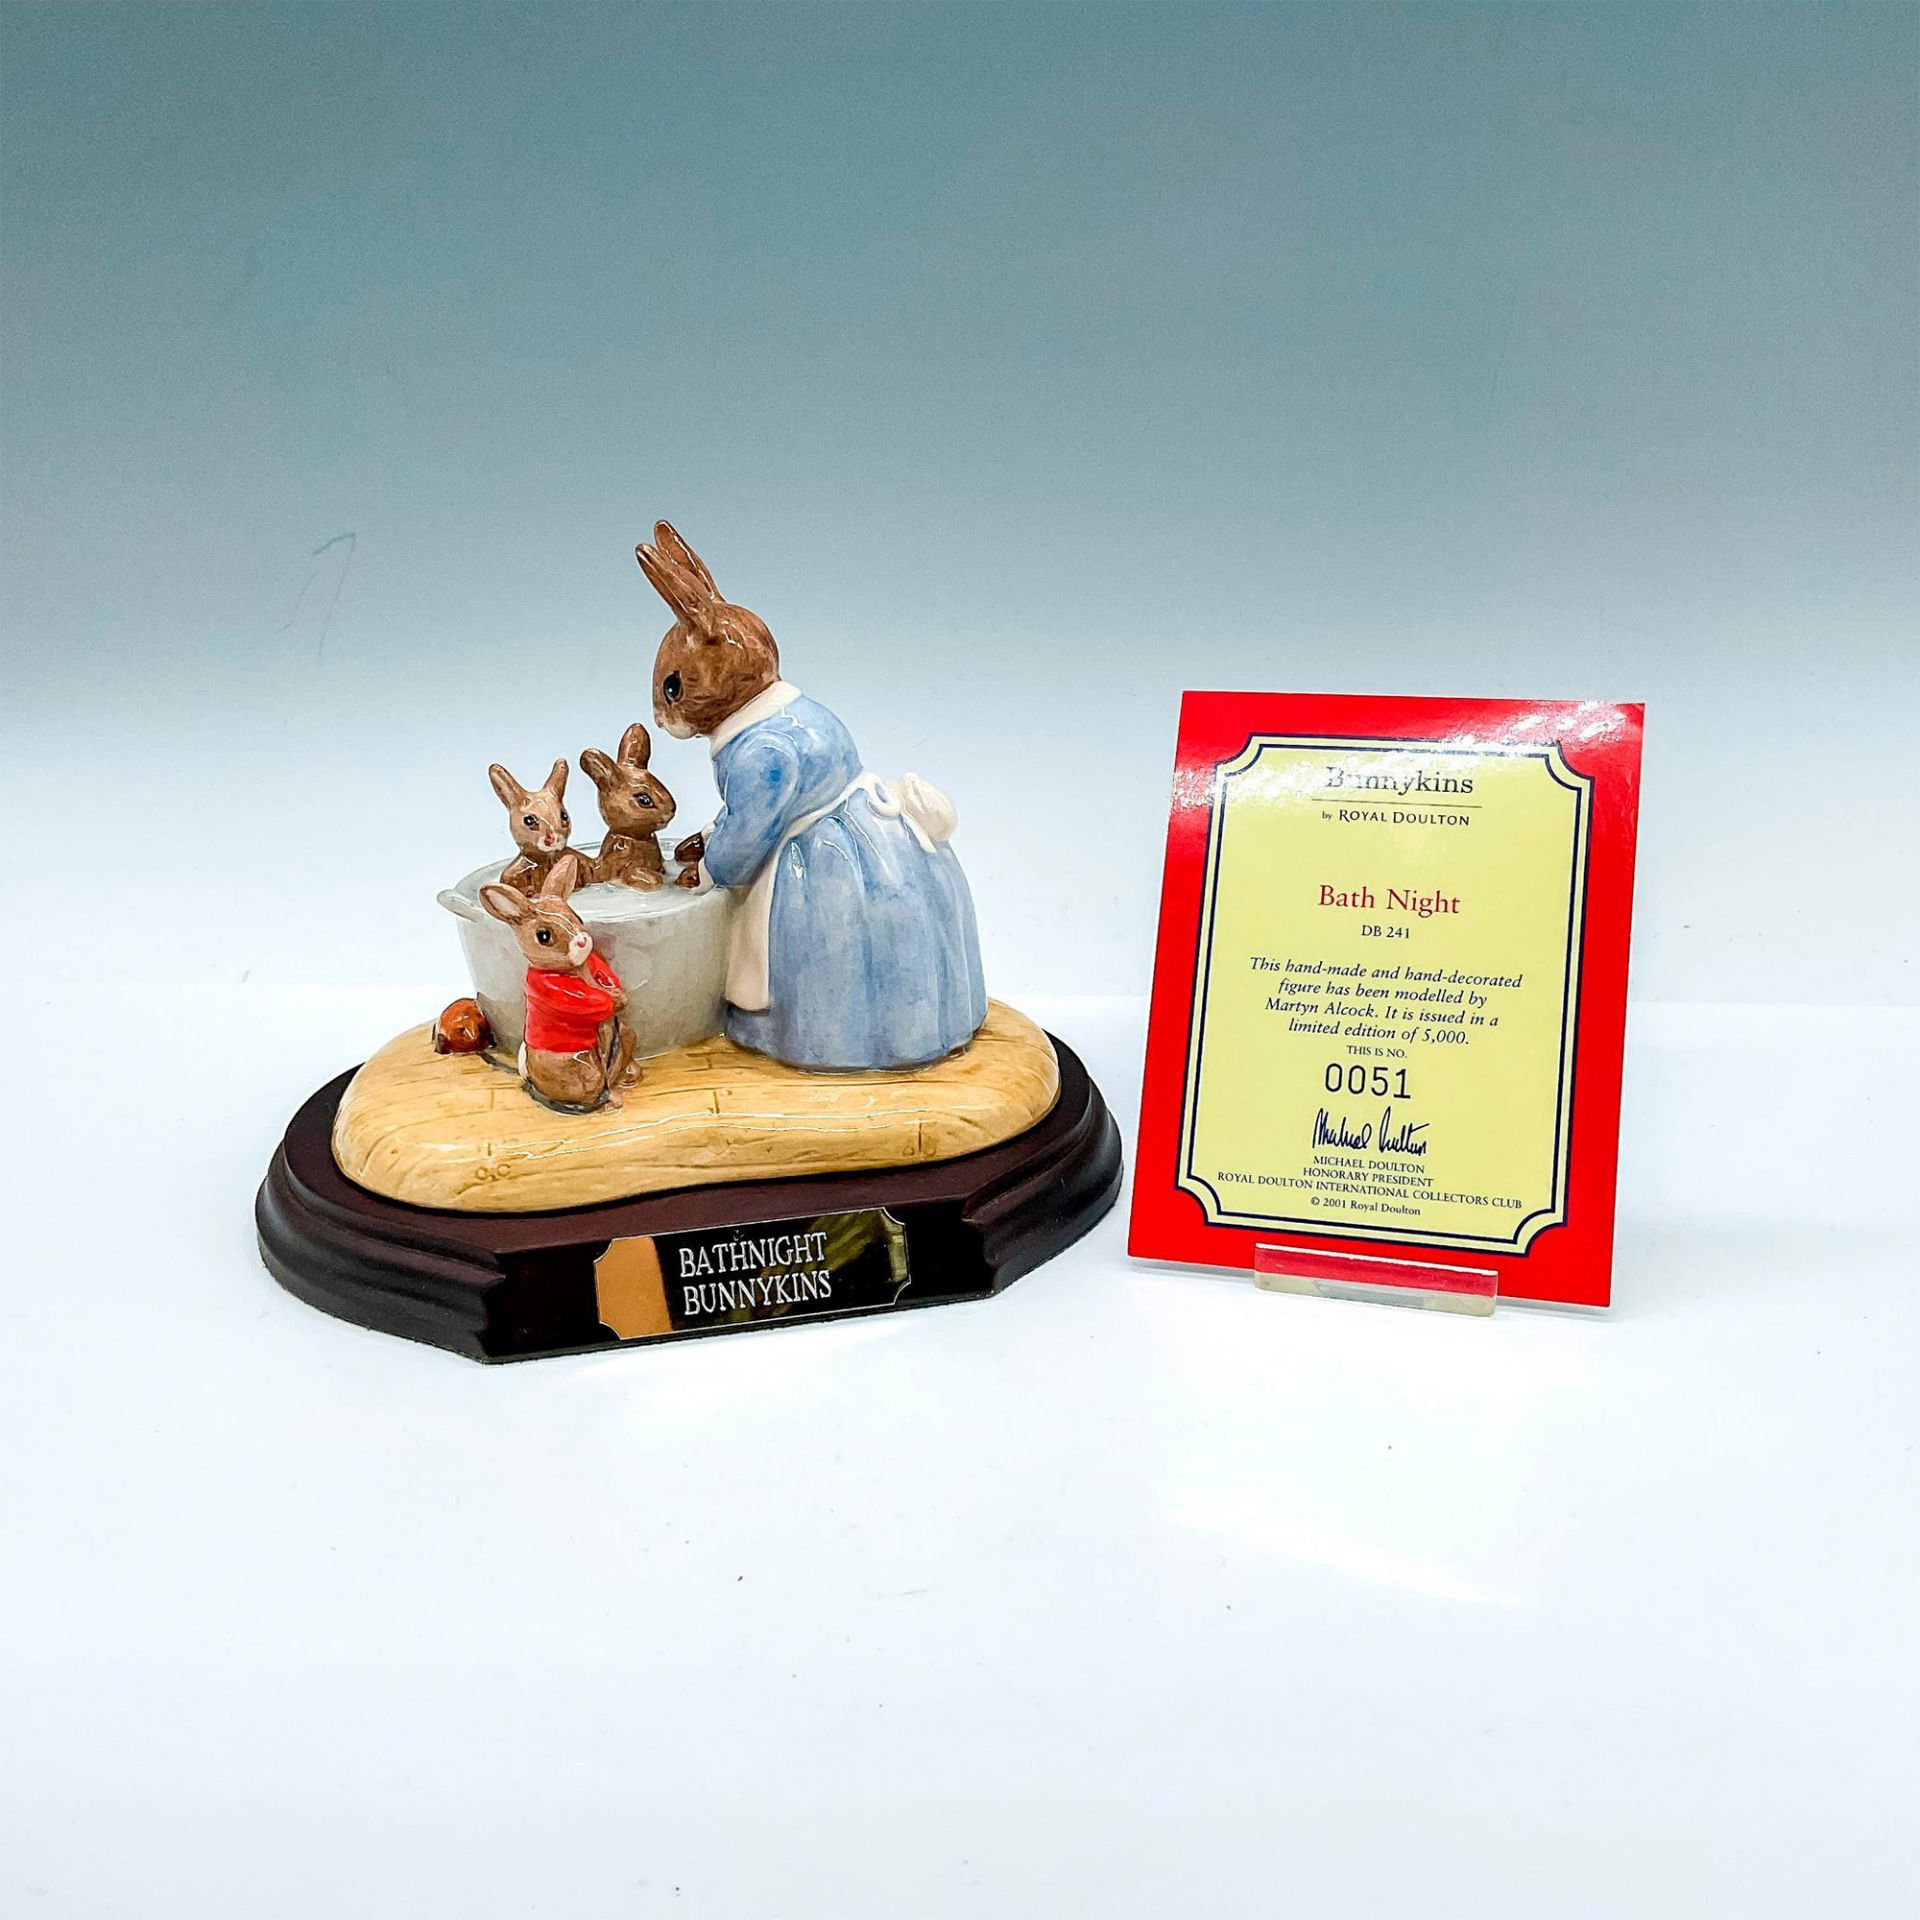 Royal Doulton Bunnykins Tableau with Base, Bathnight 0051 - Image 2 of 4